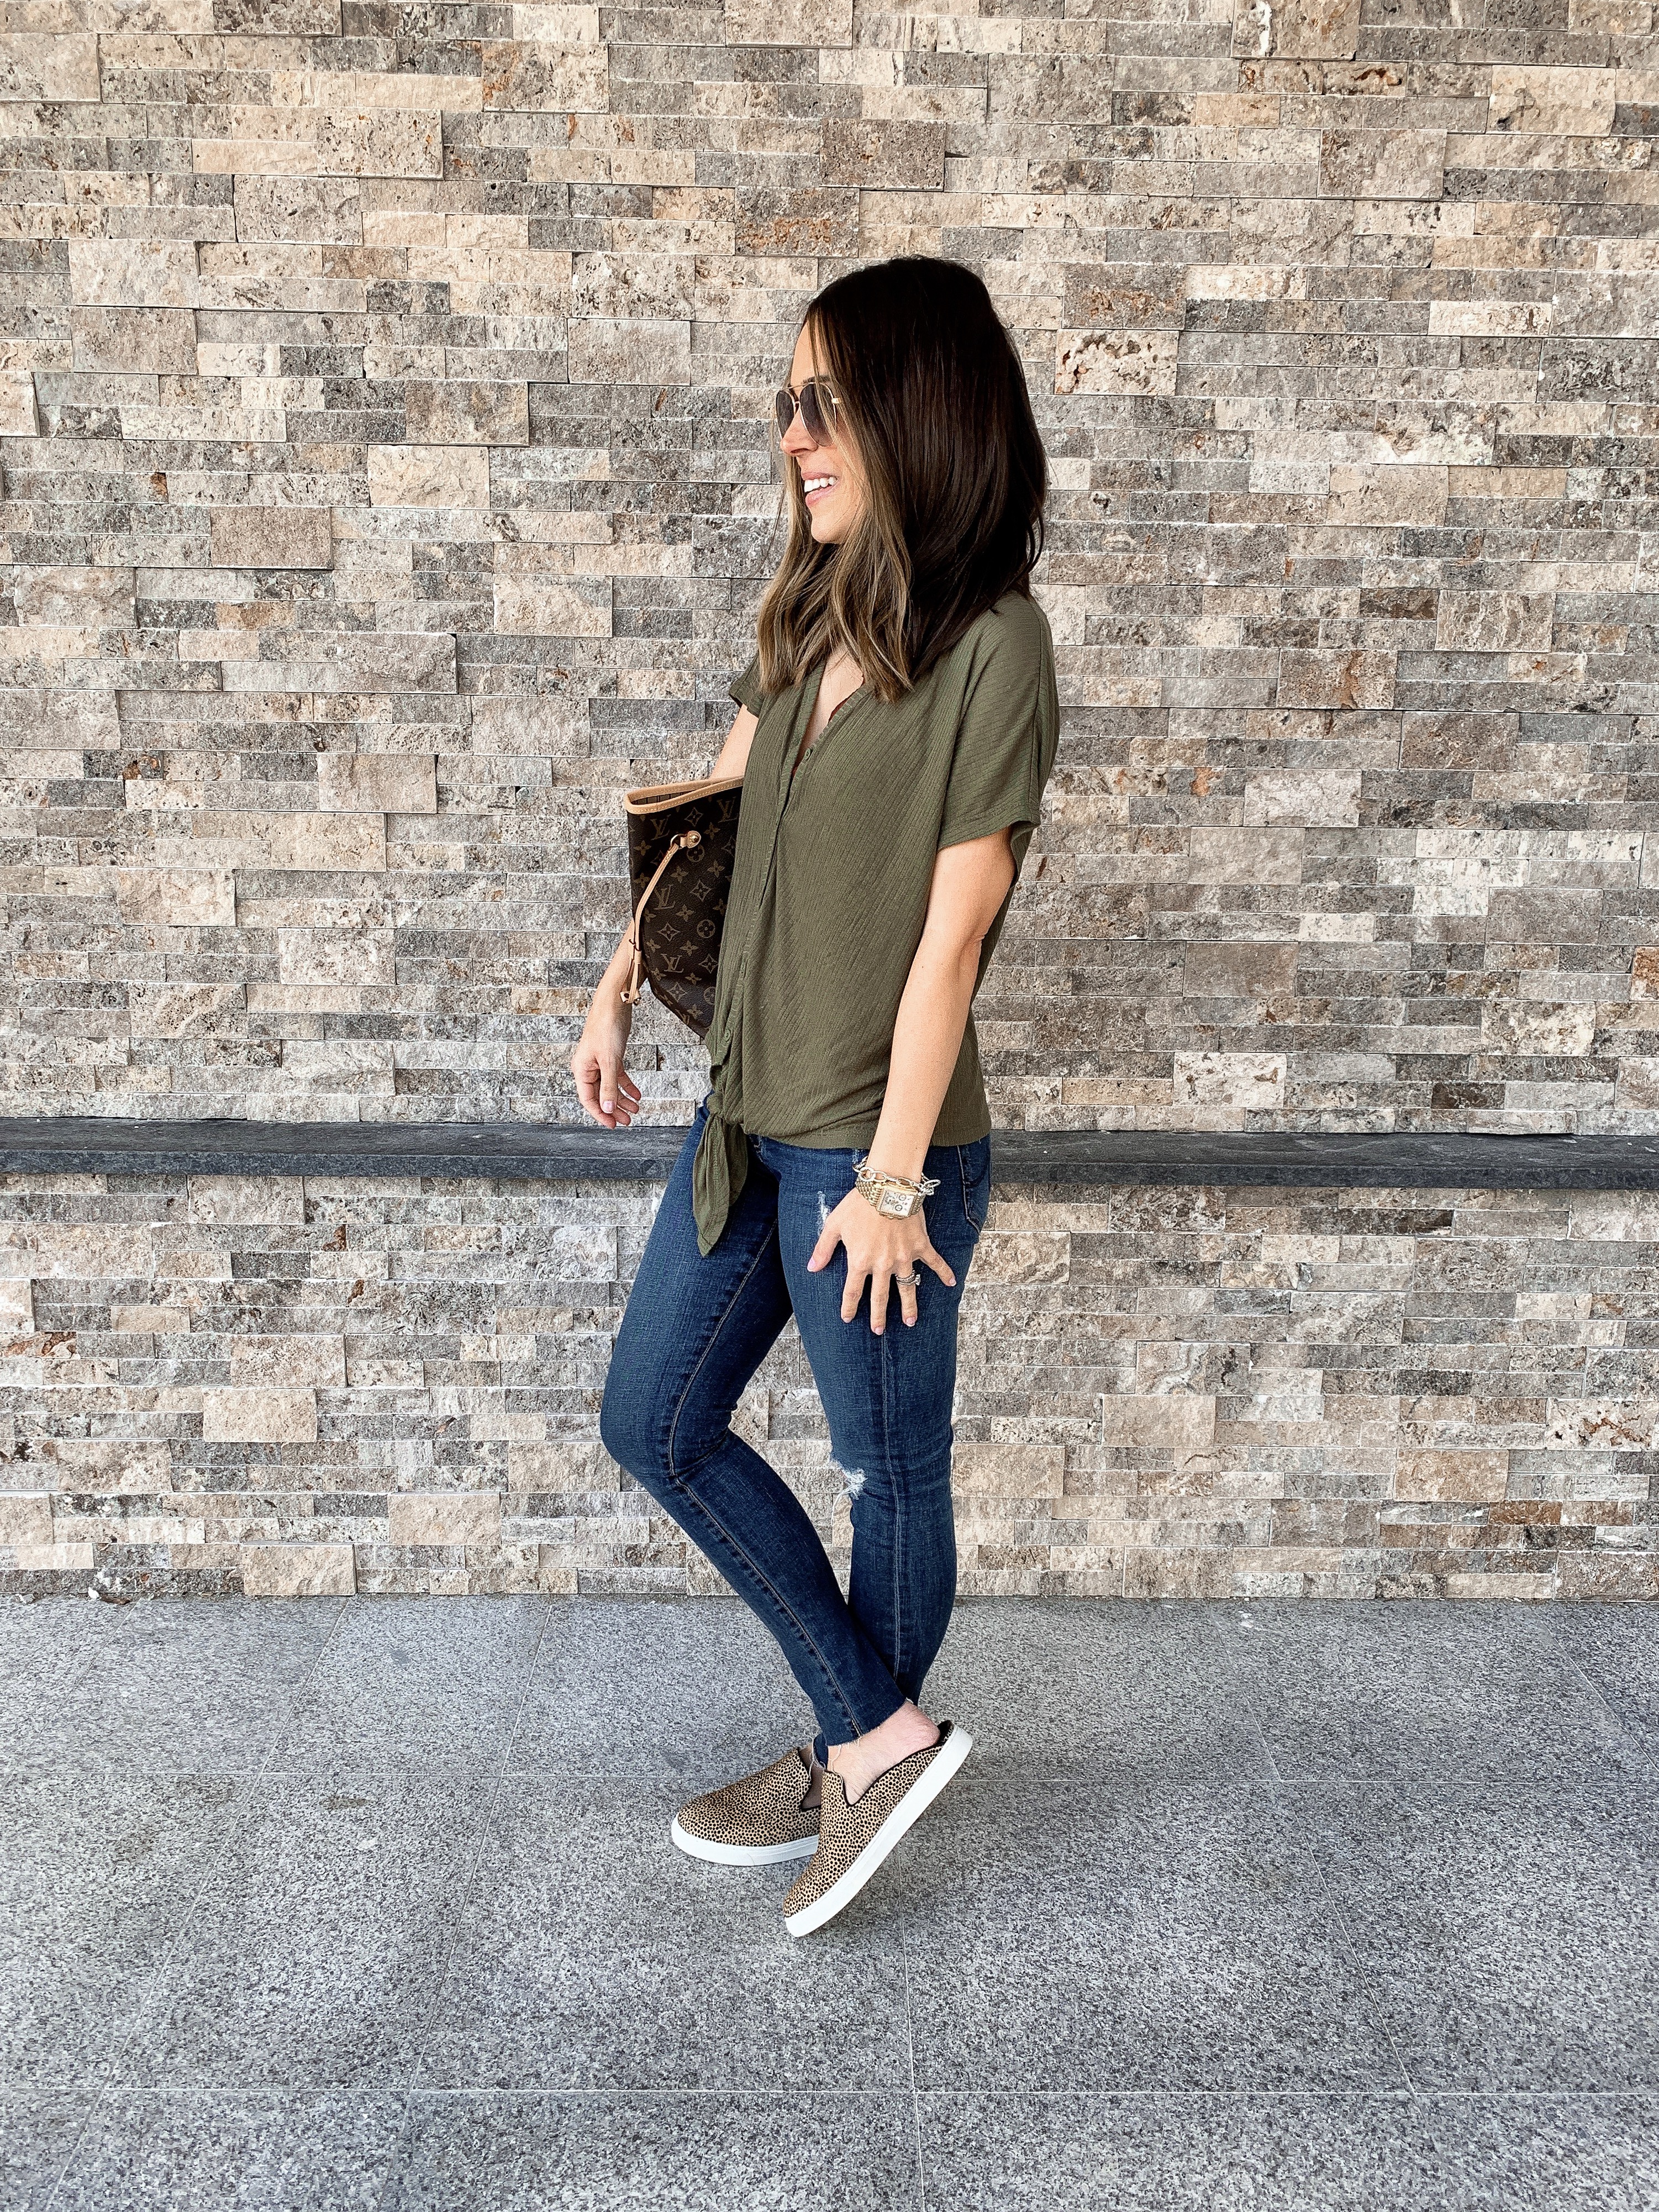 Olive + Leopard Outfit | MrsCasual